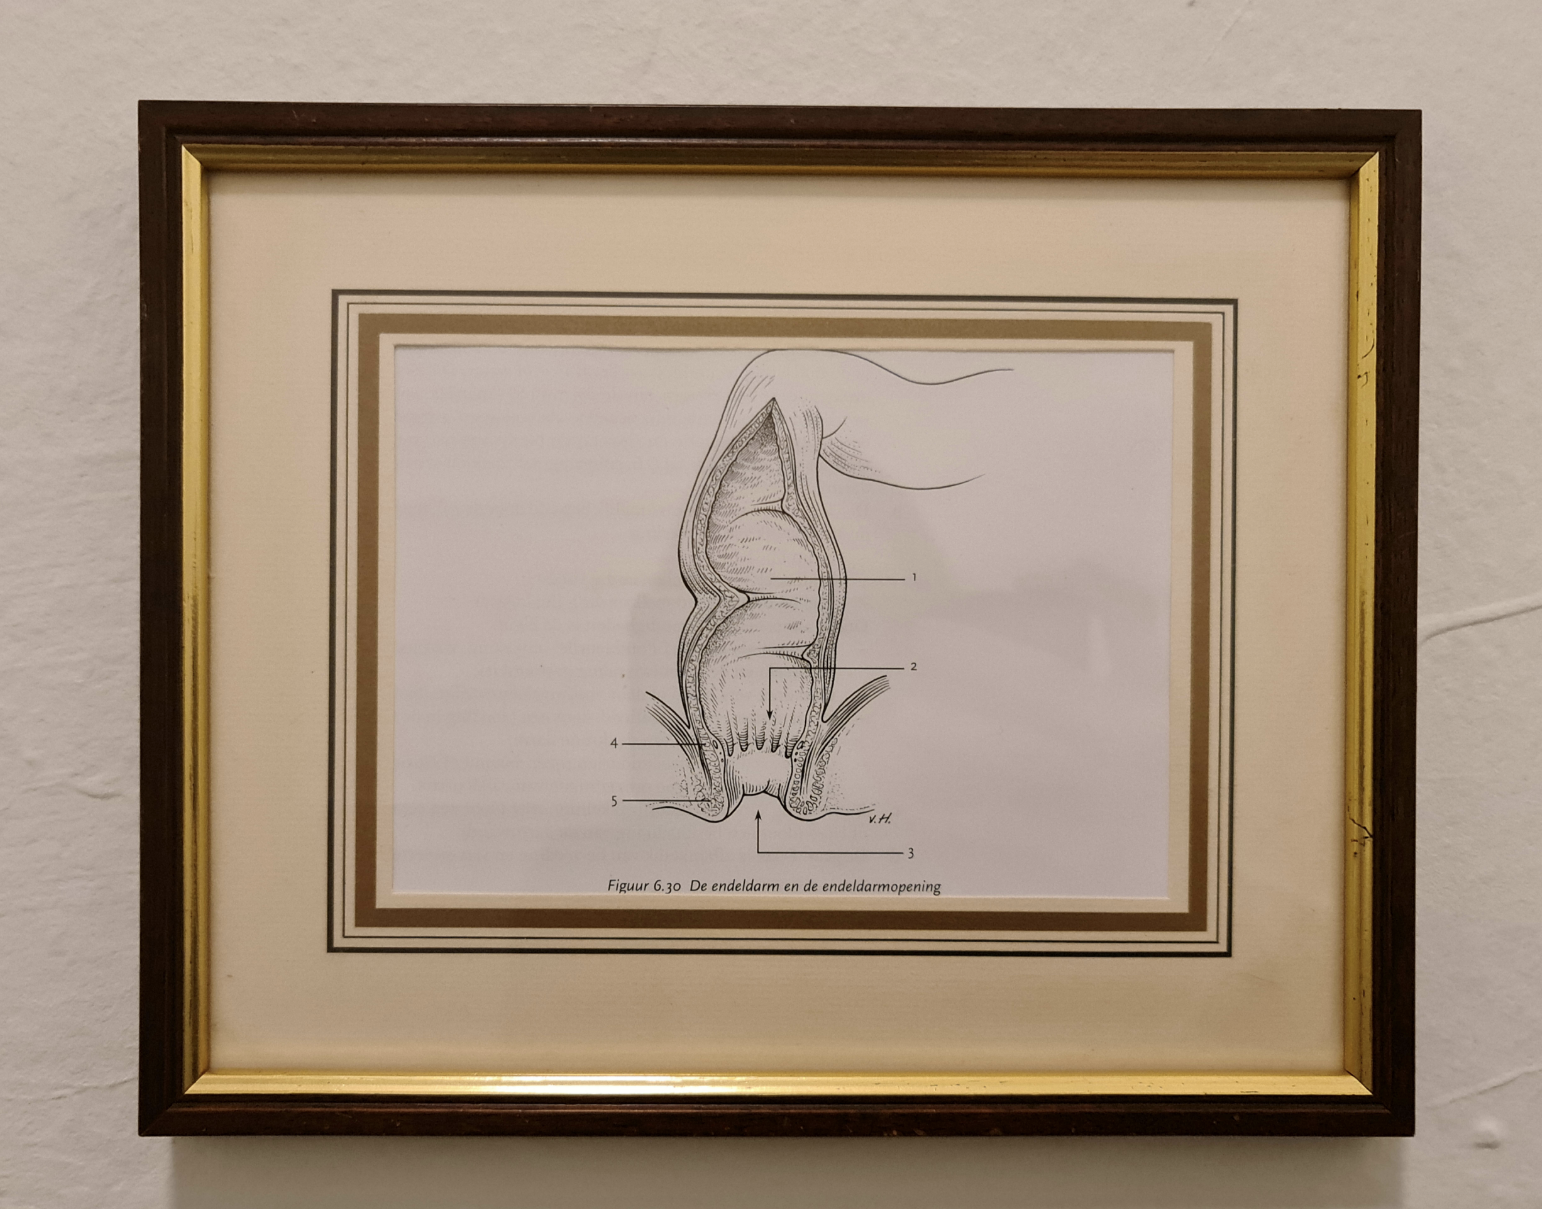 A framed picture on the bathroom wall is a diagram of feces passing through the intestine